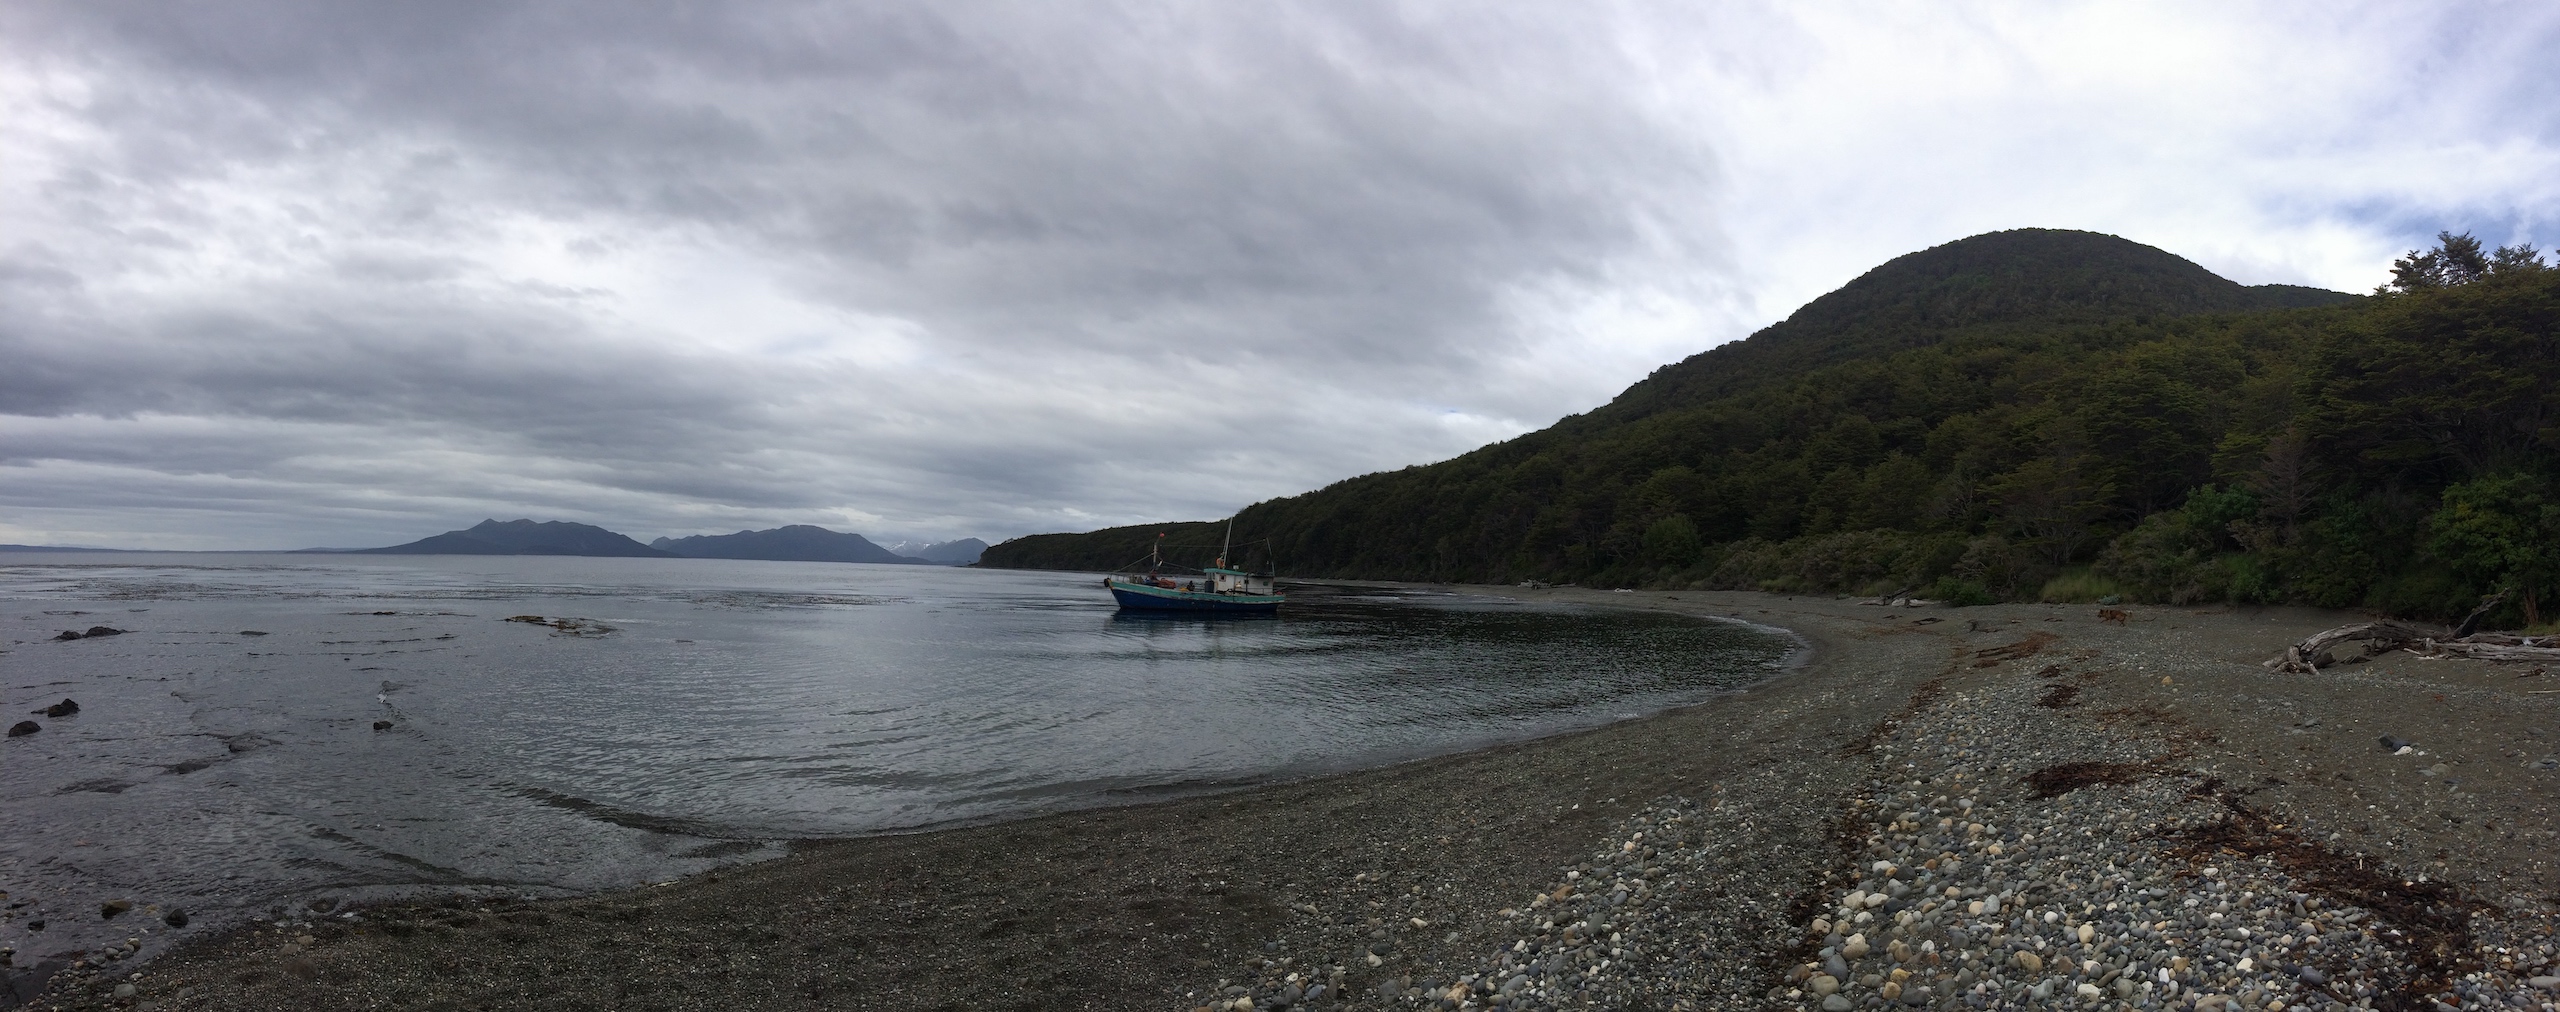 Photograph of a fishing boat in a lonely bay on the Strait of Magellan